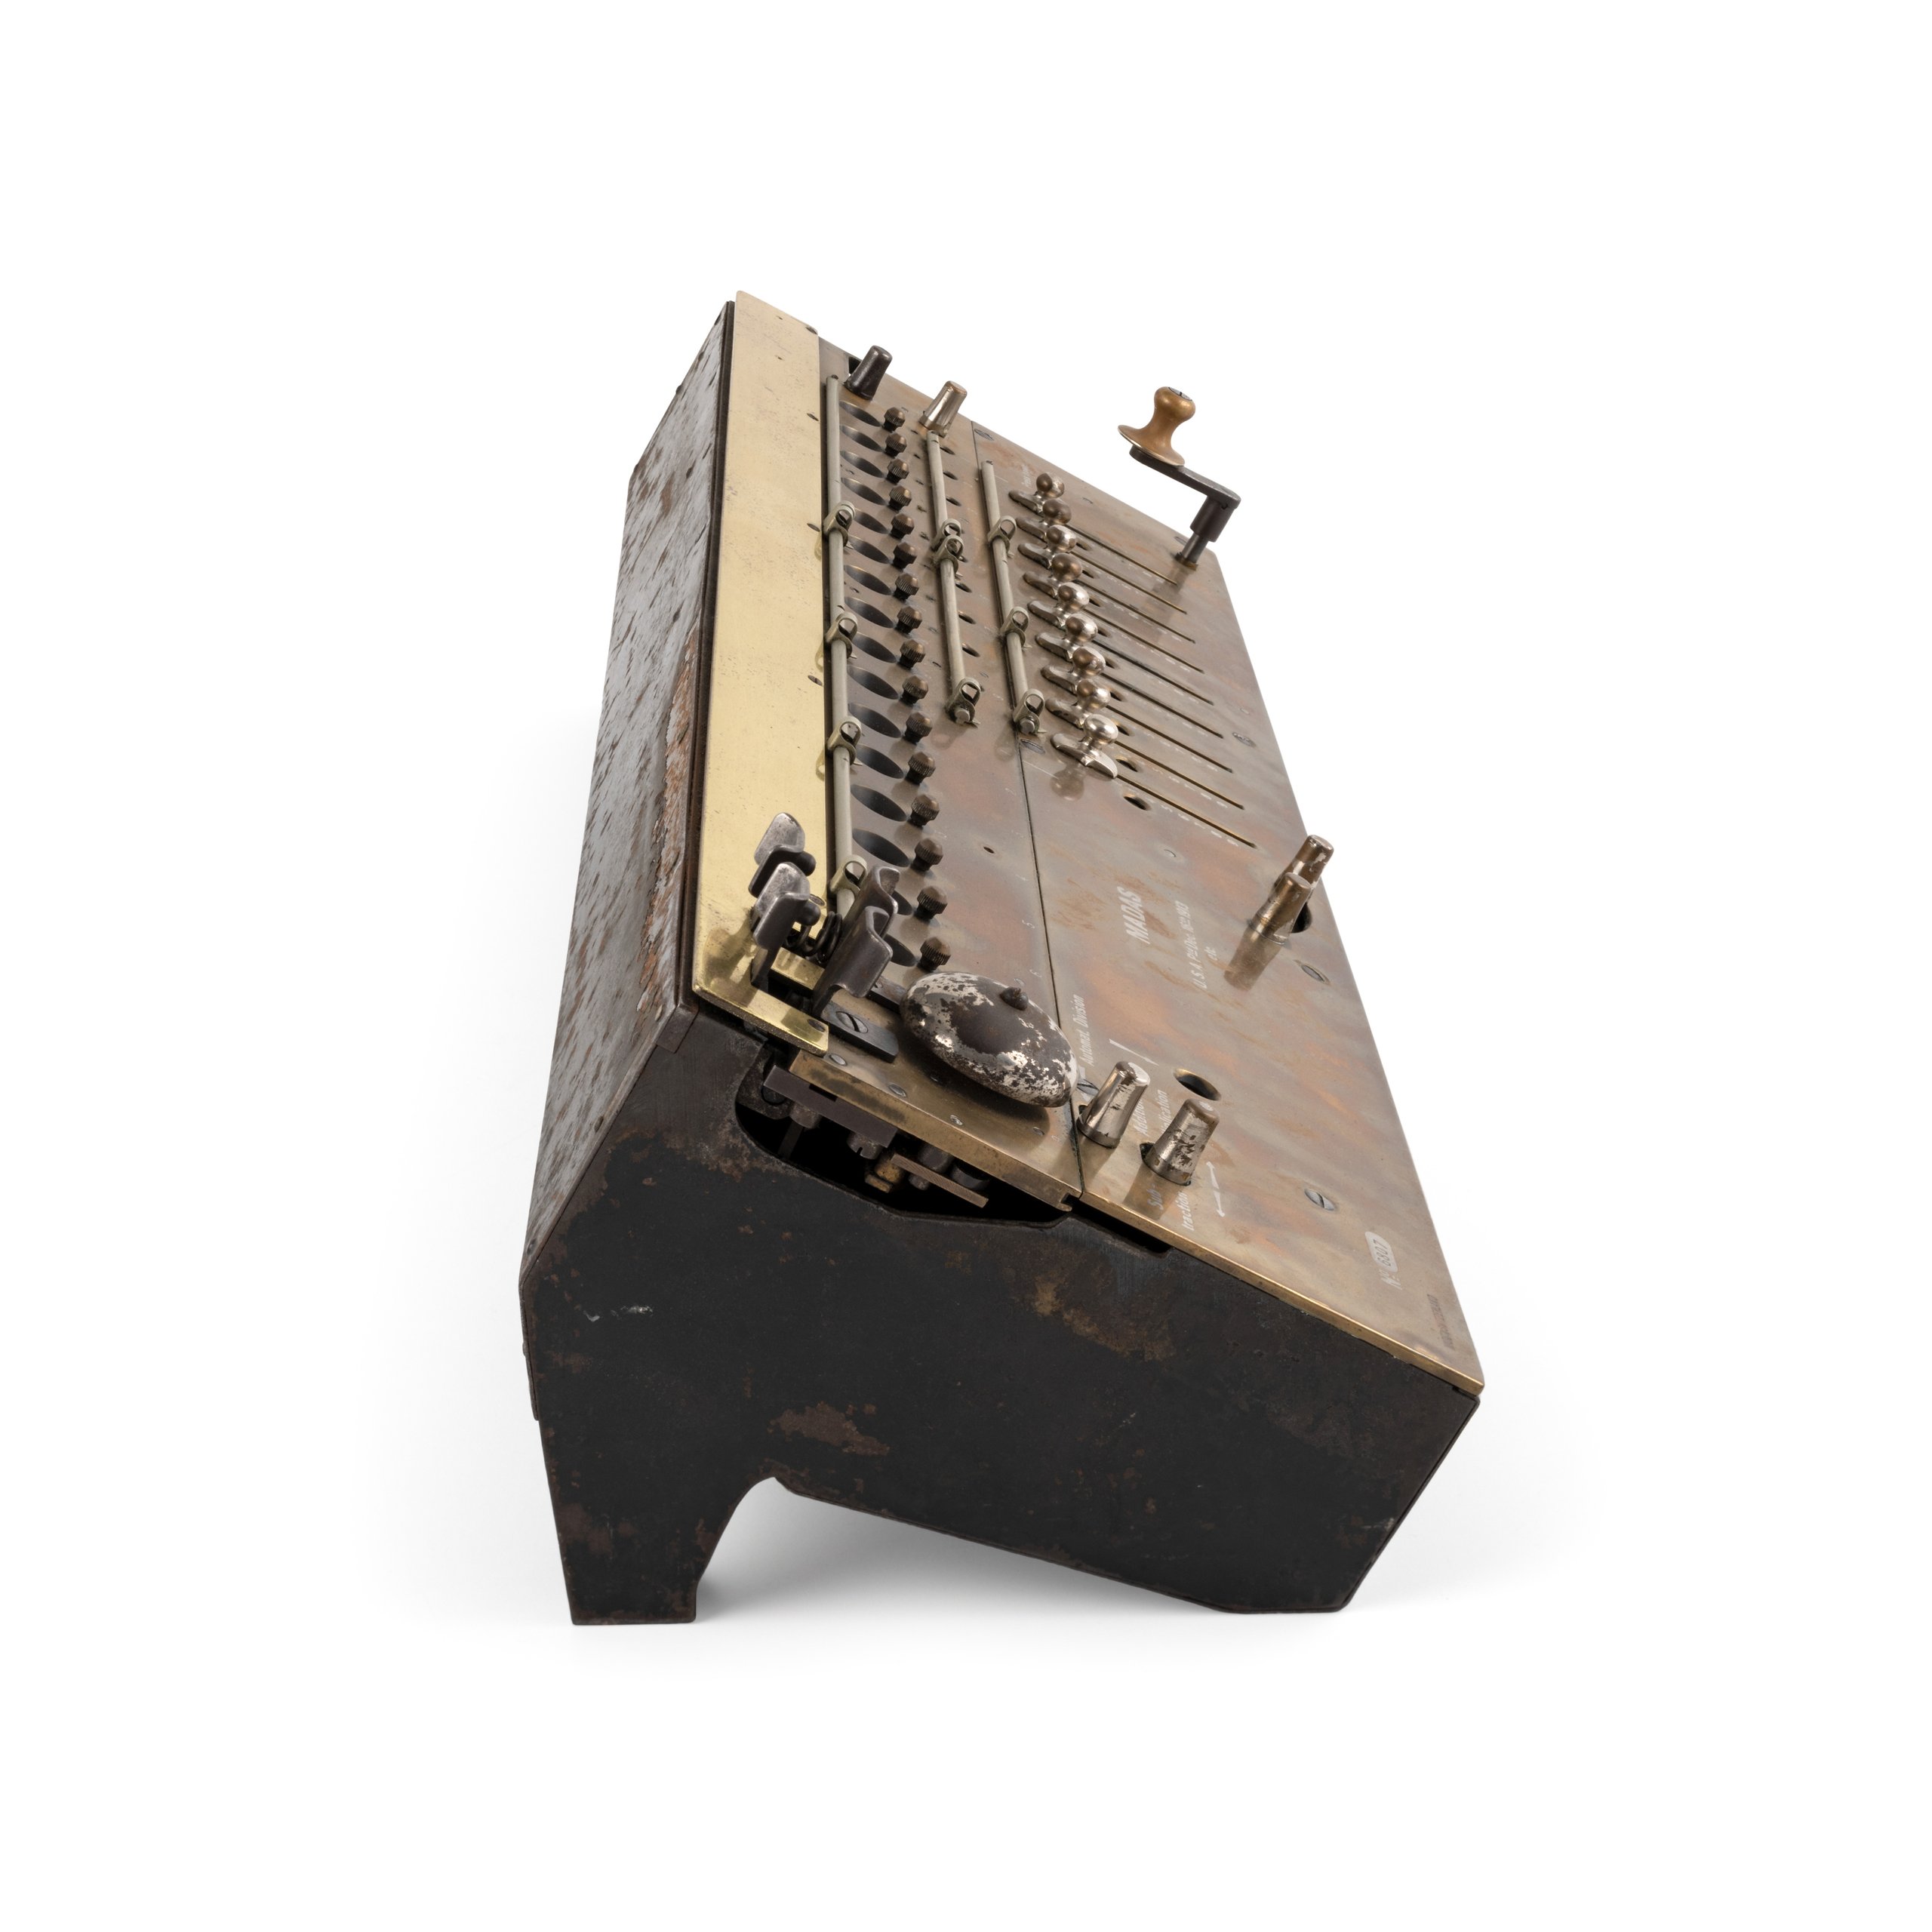 Millionaire Calculating Machine with Stand